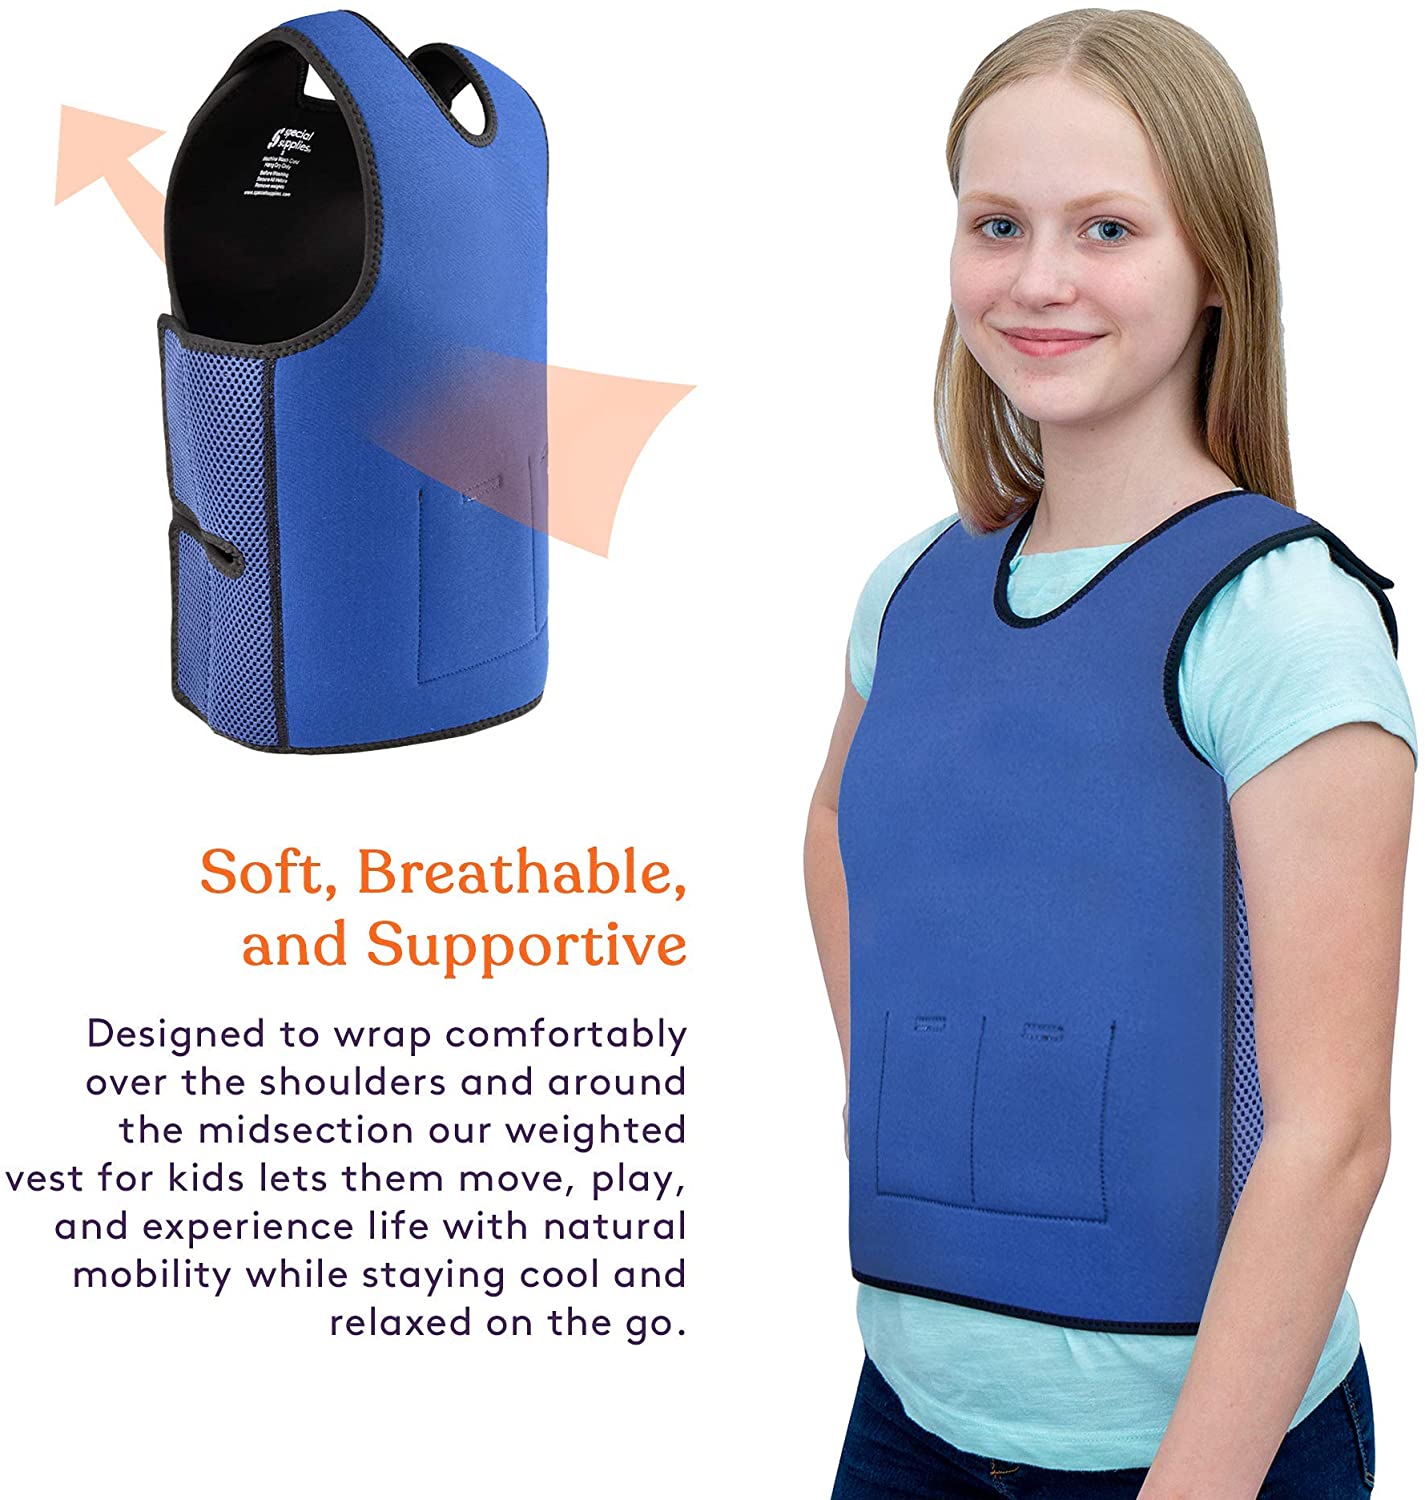 What's the Difference Between a Weighted Vest and Compression Vest